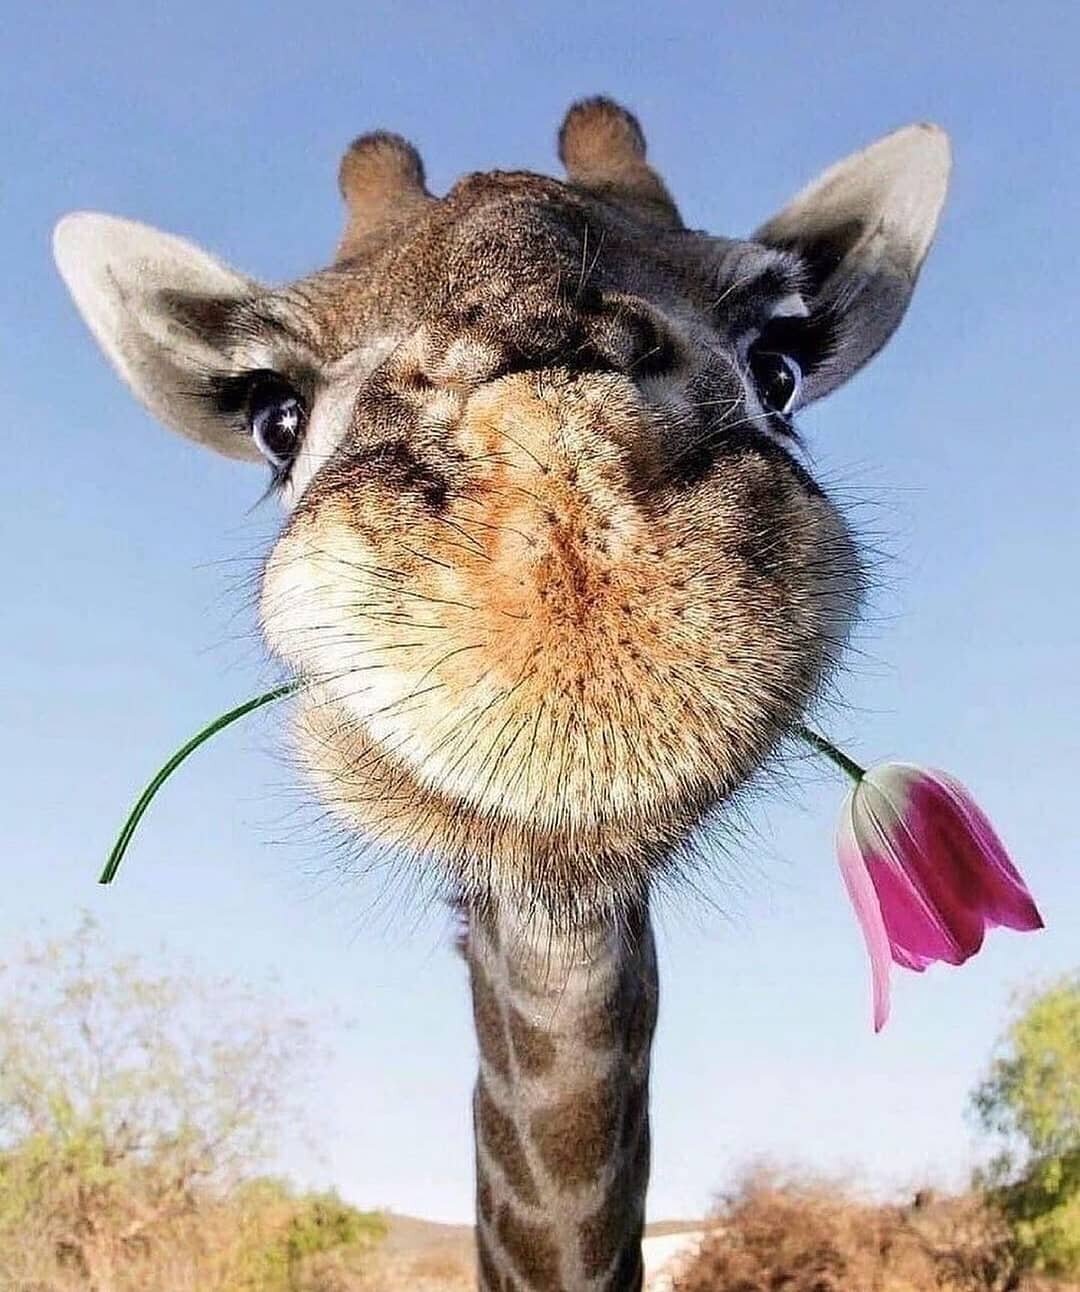 😍 the answer is yes Gerald! I will accept this flower from you 🥰 congratulations on your feature @geralds.life 

----------------------------------------------------------------------

What we do:
NOT just another Instagram repost page, we have the